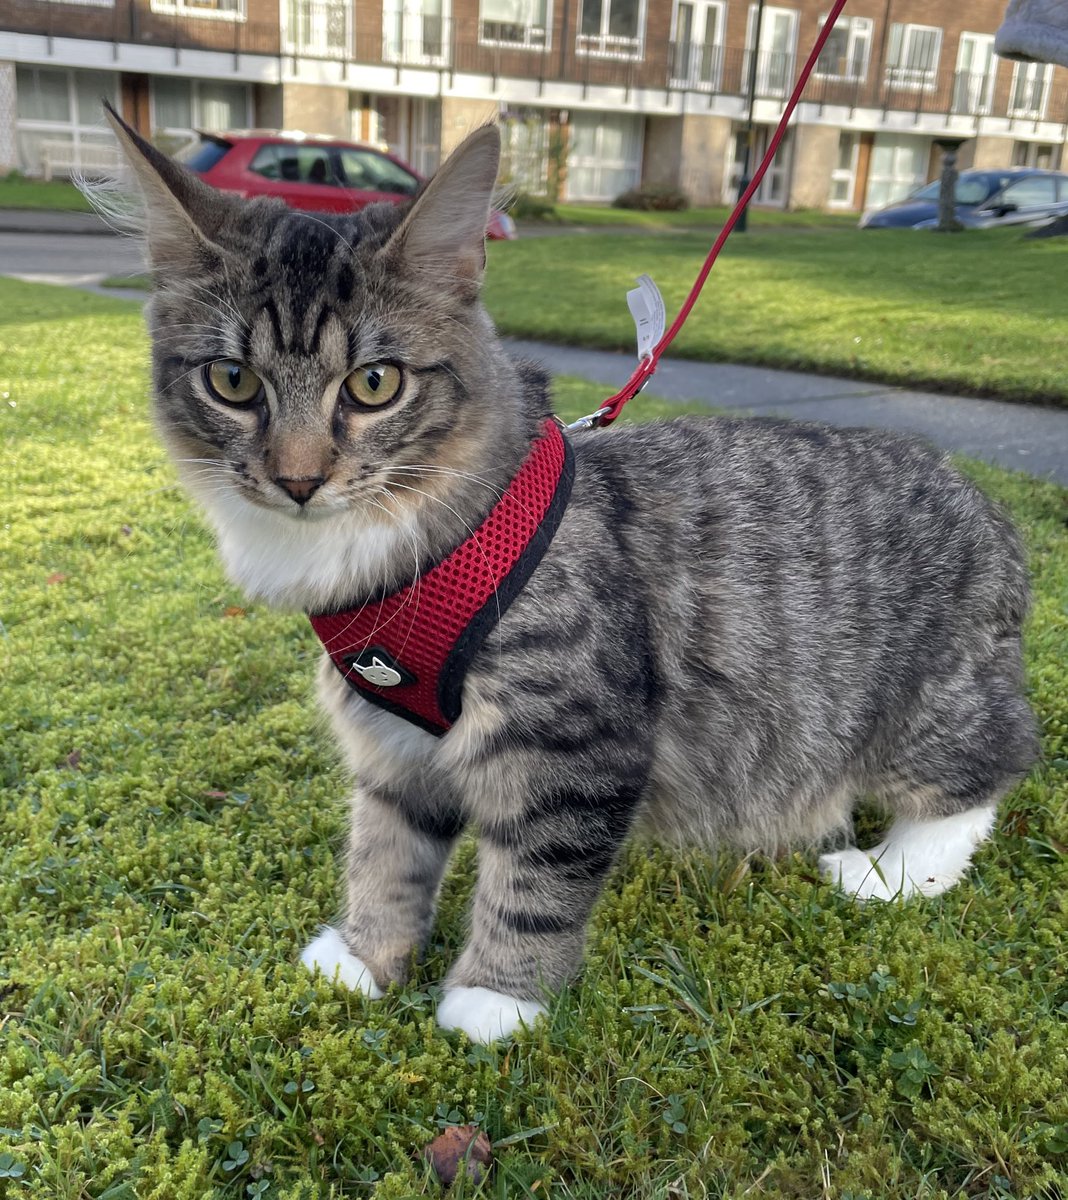 Thor’s first outdoor adventure. I was amazed at how relaxed and confident he was. Strutting around like the king of the garden. #sundayvibes #catsoftwitter https://t.co/yQ1rXlKvEa